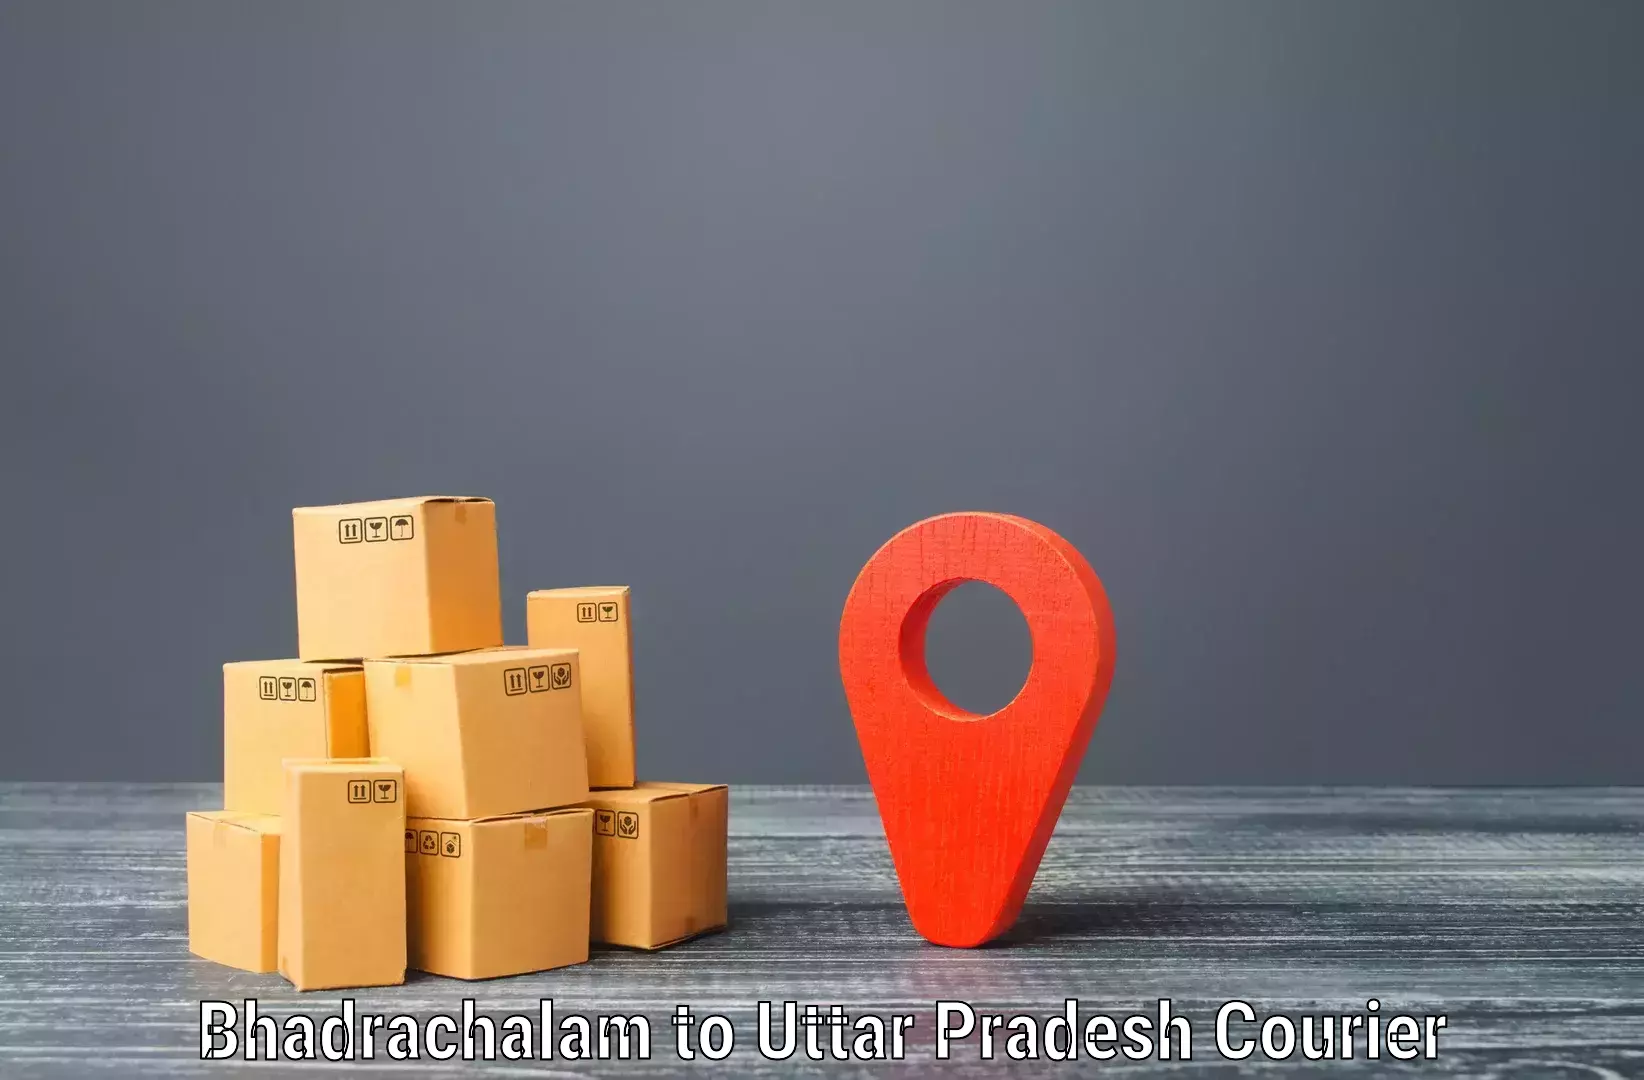 Integrated shipping systems in Bhadrachalam to Kalpi